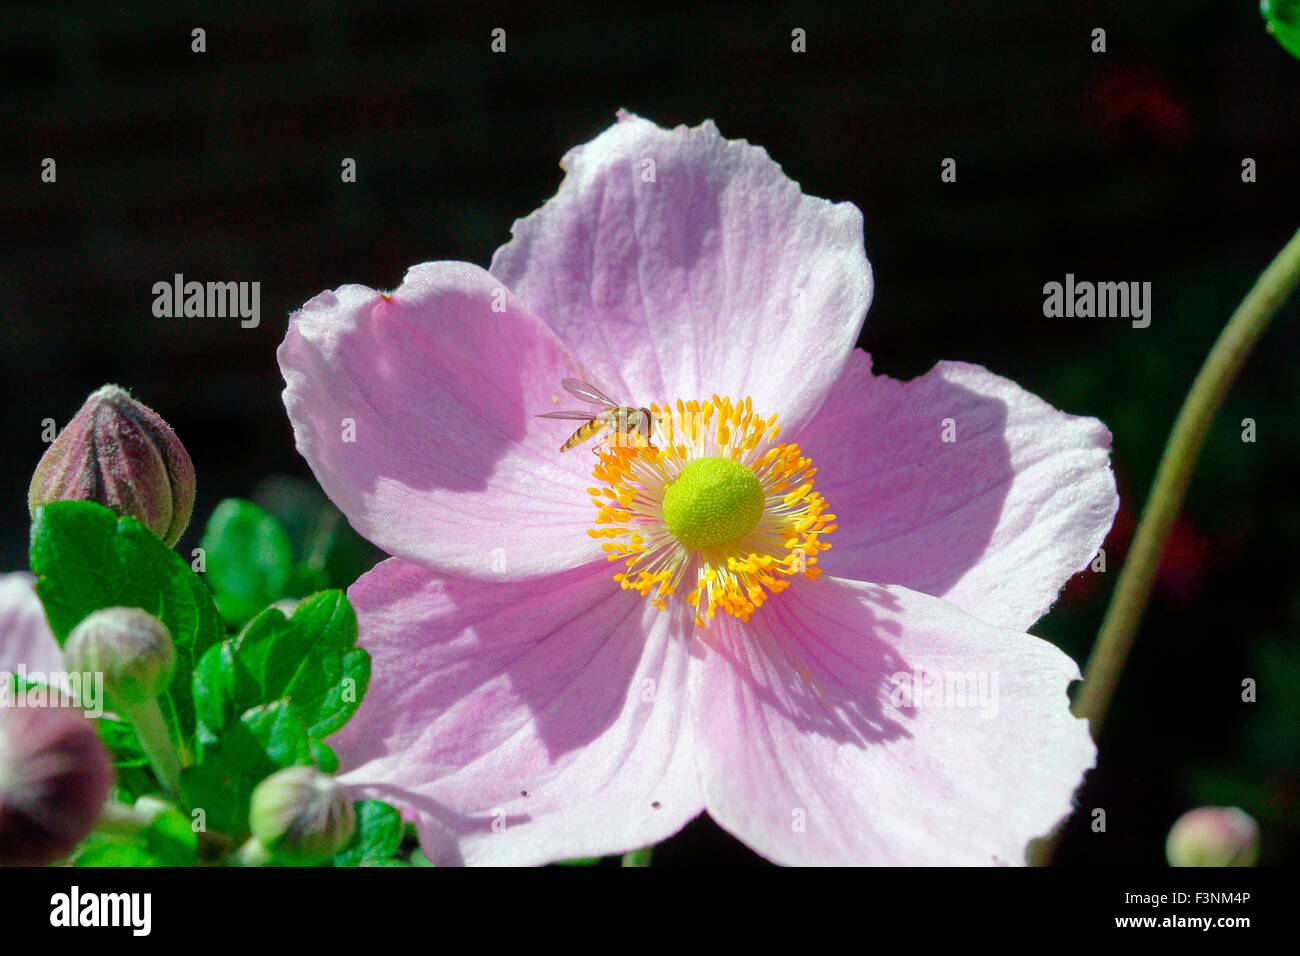 HOVERFLY ON SEPTEMBER CHARM (JAPANESE, ANEMONES) Stock Photo